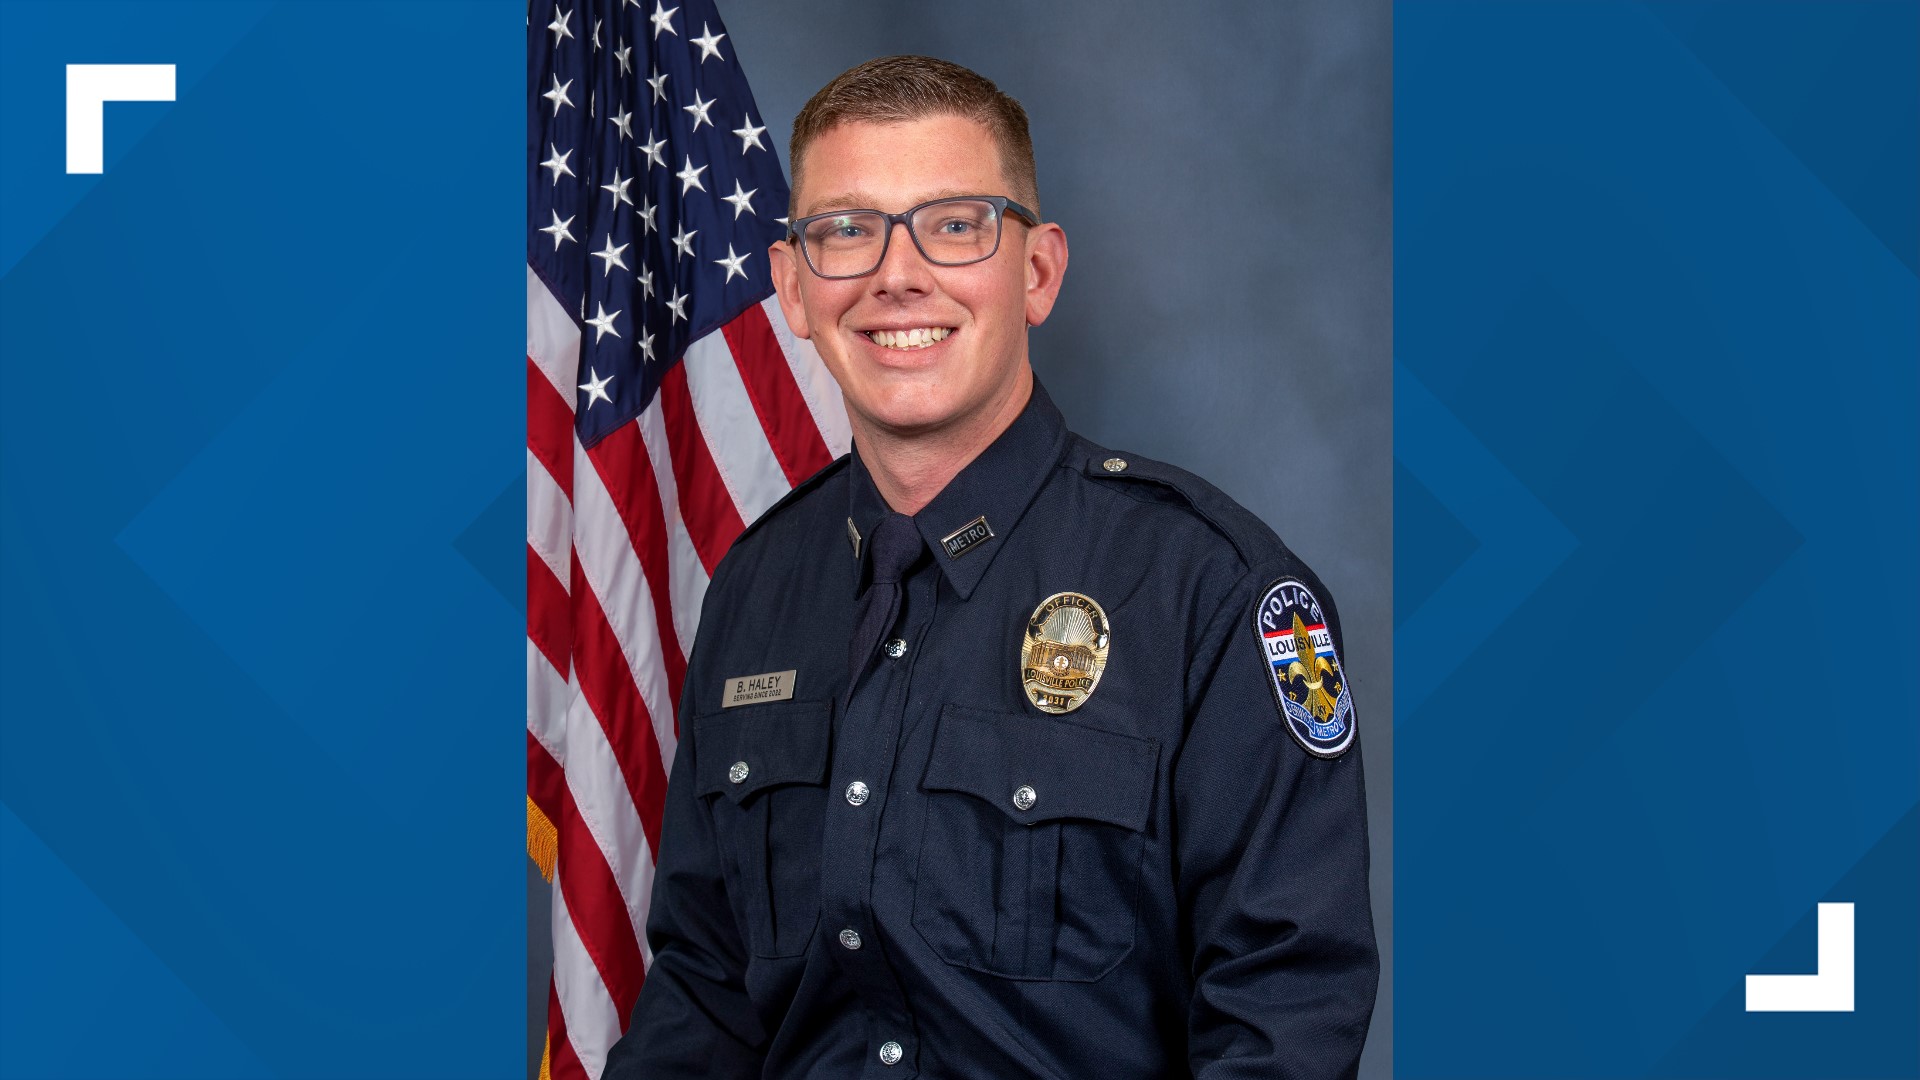 Officer Brandon Haley was doing a routine traffic stop at 2:30 a.m. Thursday when someone shot him in the upper torso from a nearby home.